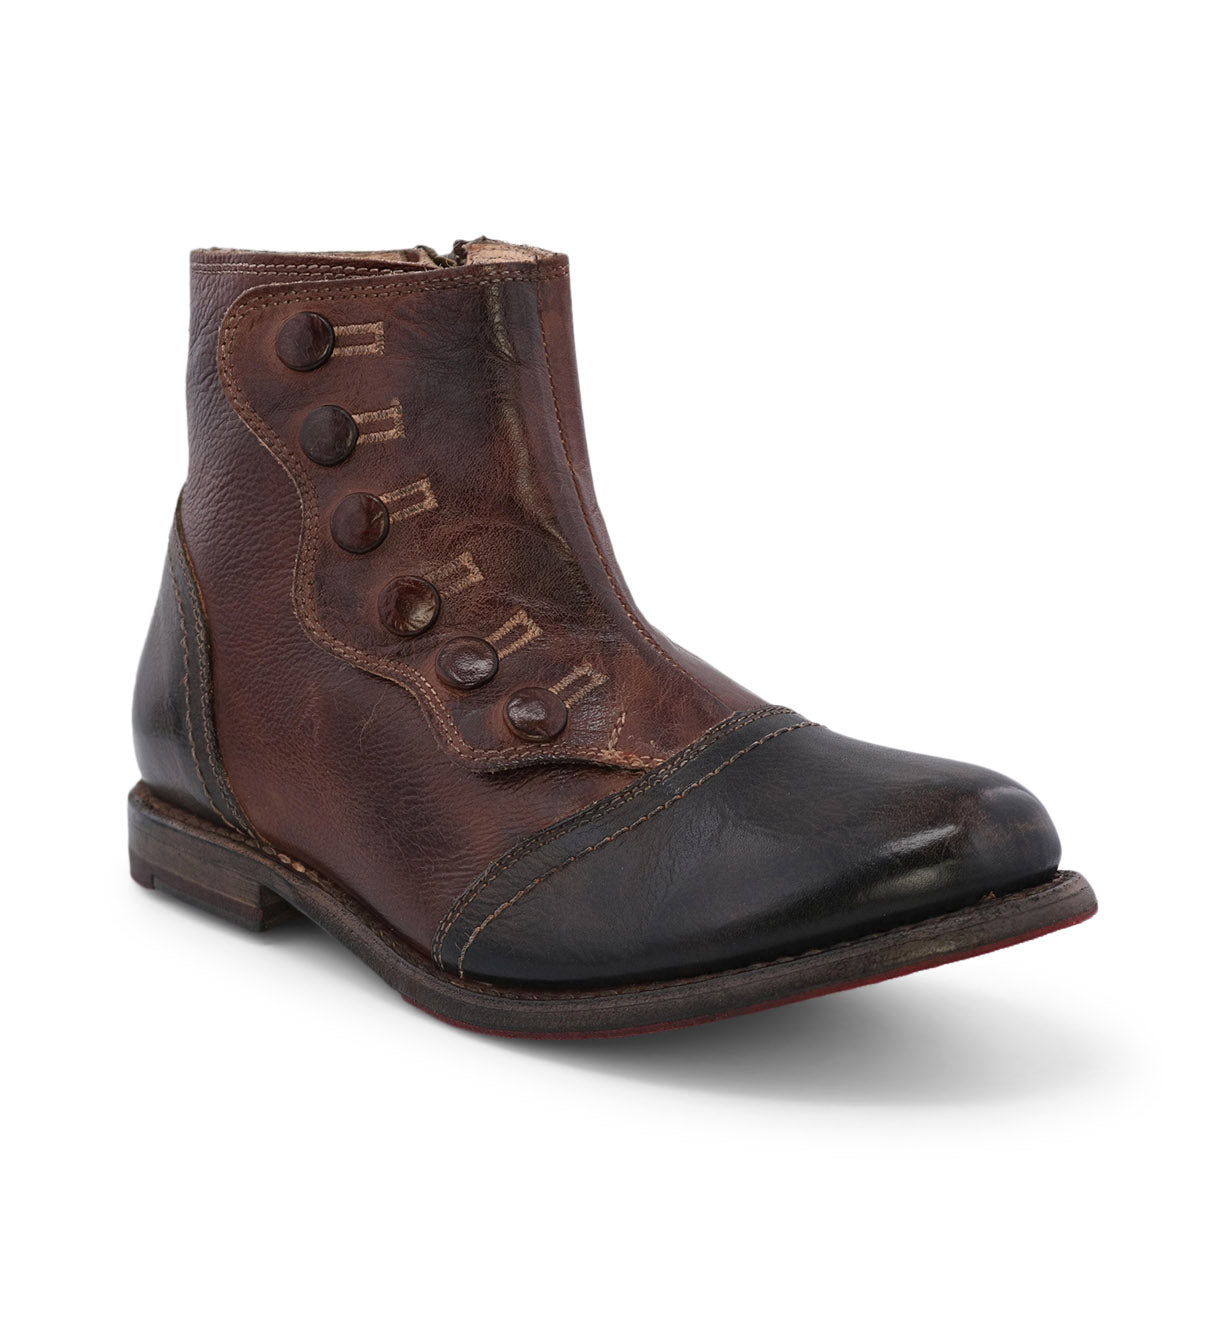 A brown leather boot with YKK zipper named Josephine by Oak Tree Farms.